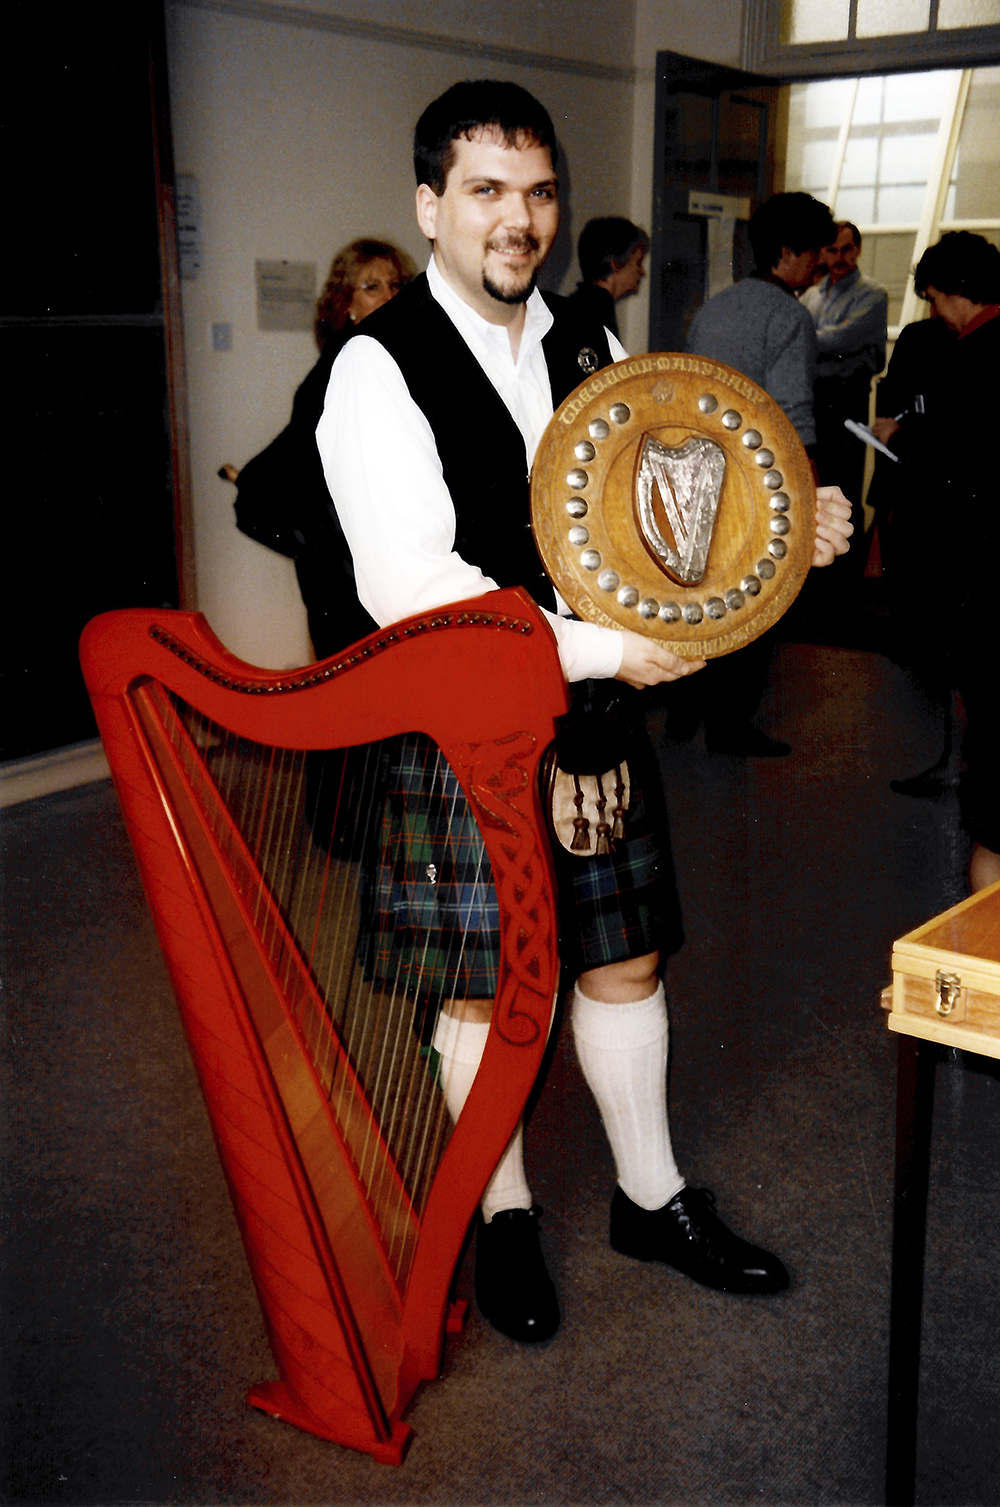 man standing next to red harp carrying large round trophy